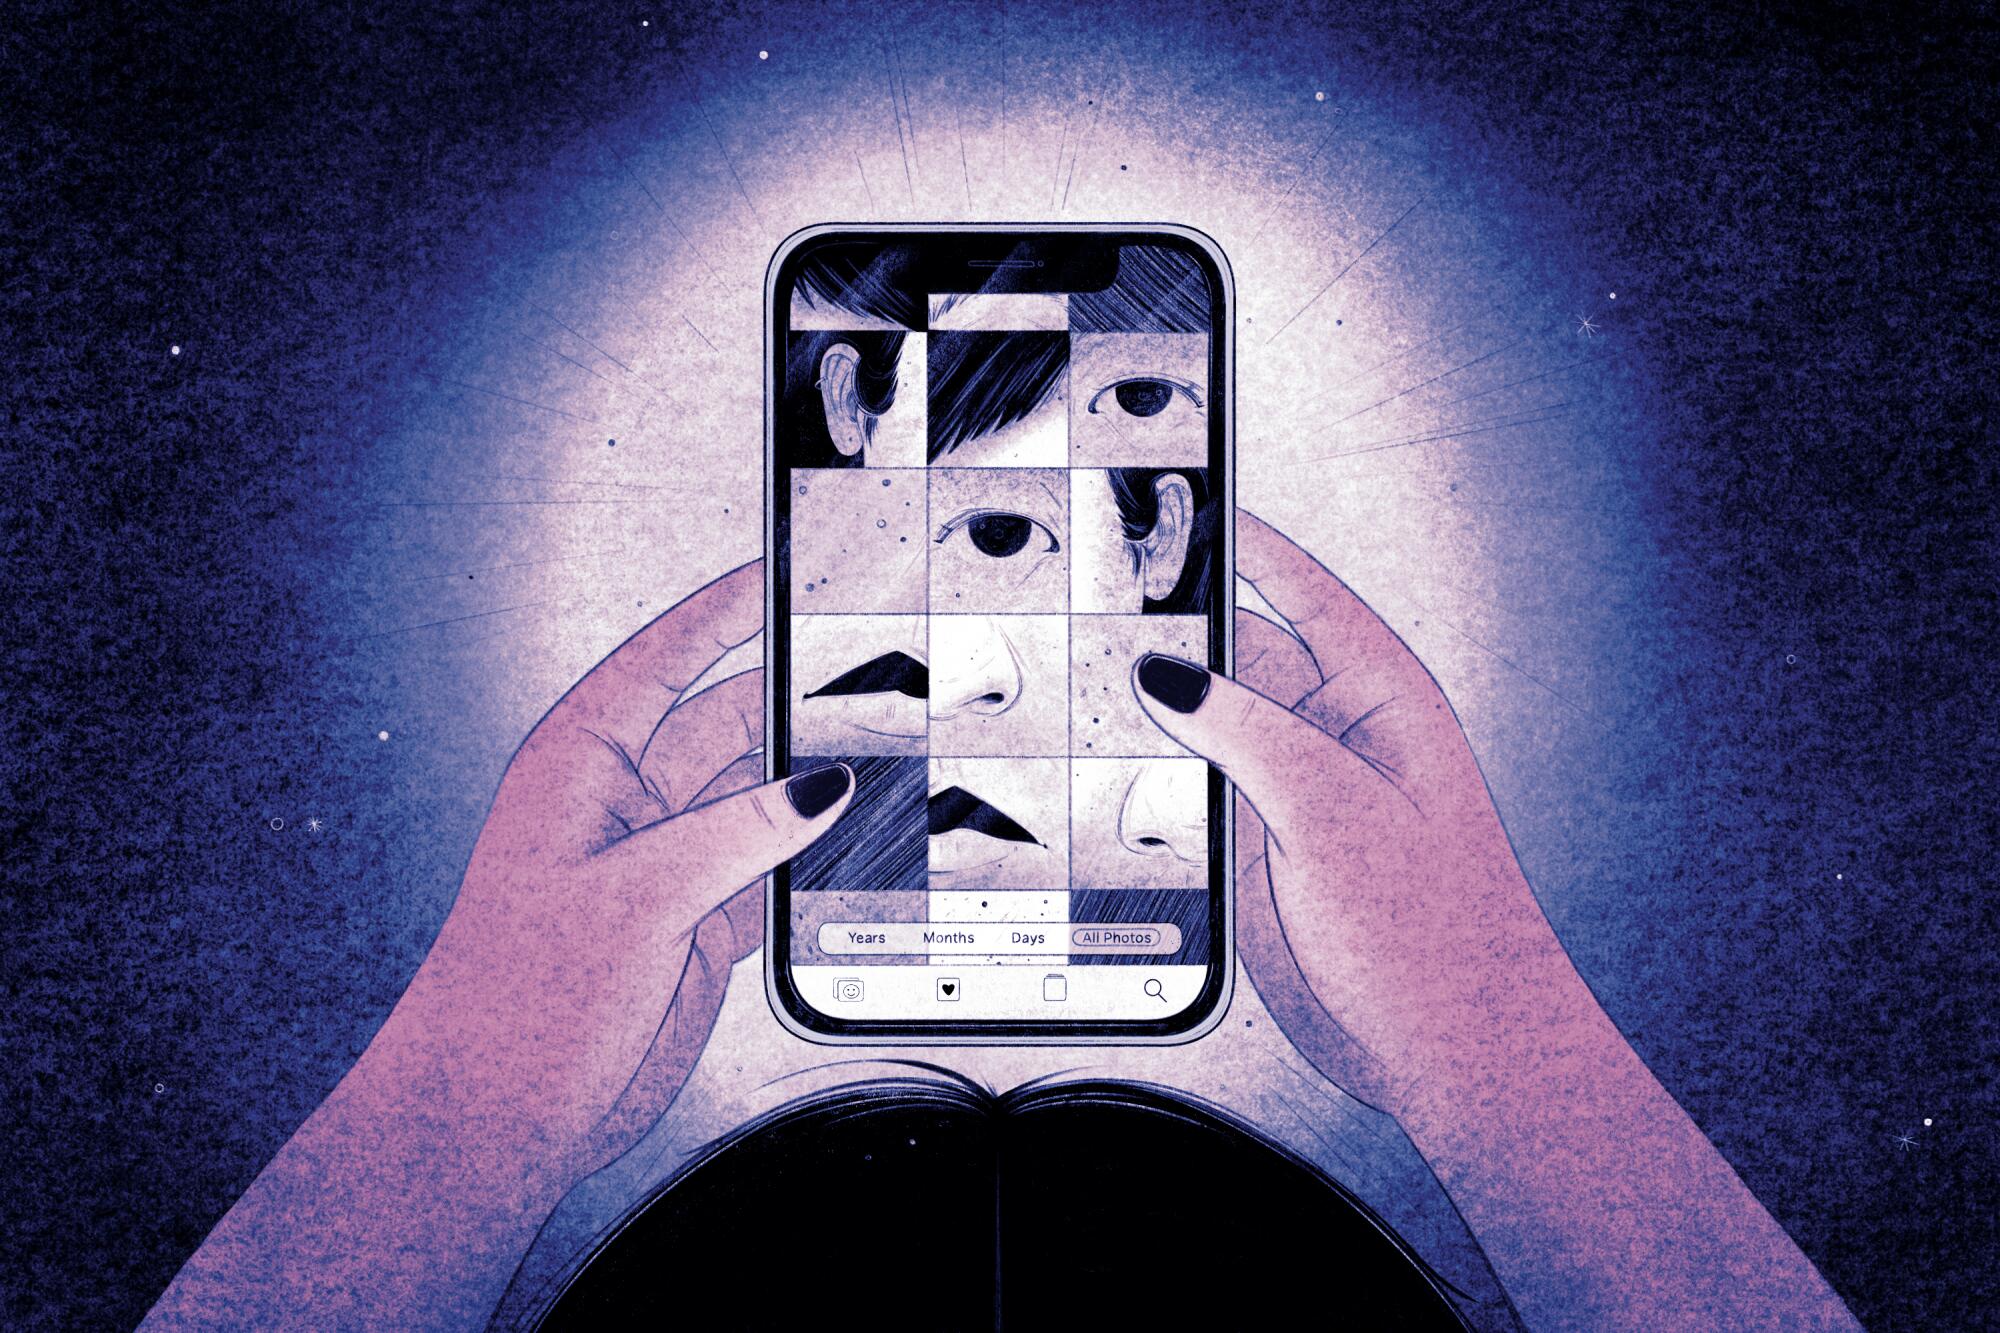 Illustration of a view of person holding a phone, with close-up cropped pics of their face on the screen